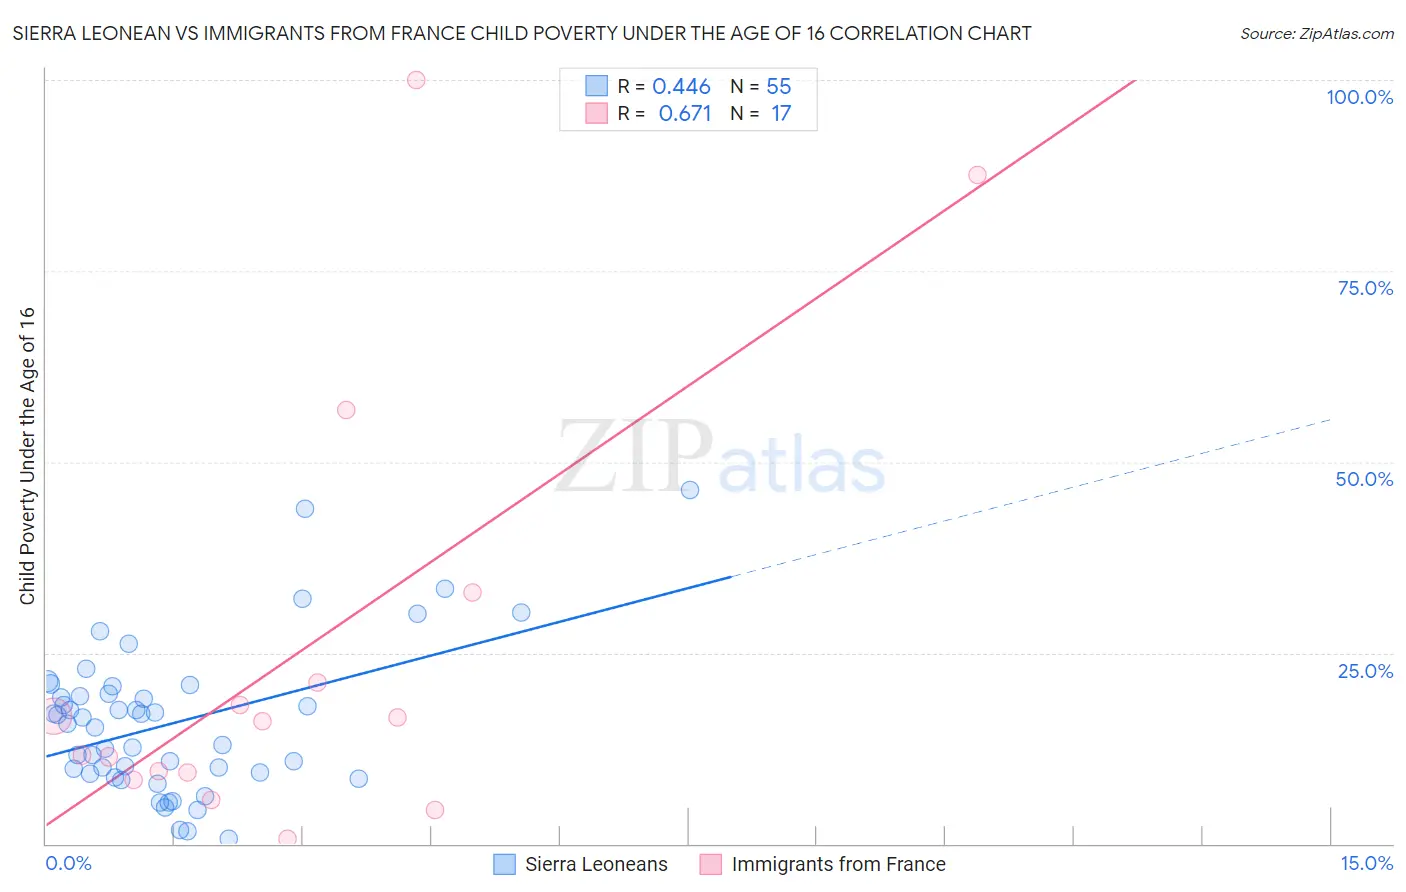 Sierra Leonean vs Immigrants from France Child Poverty Under the Age of 16